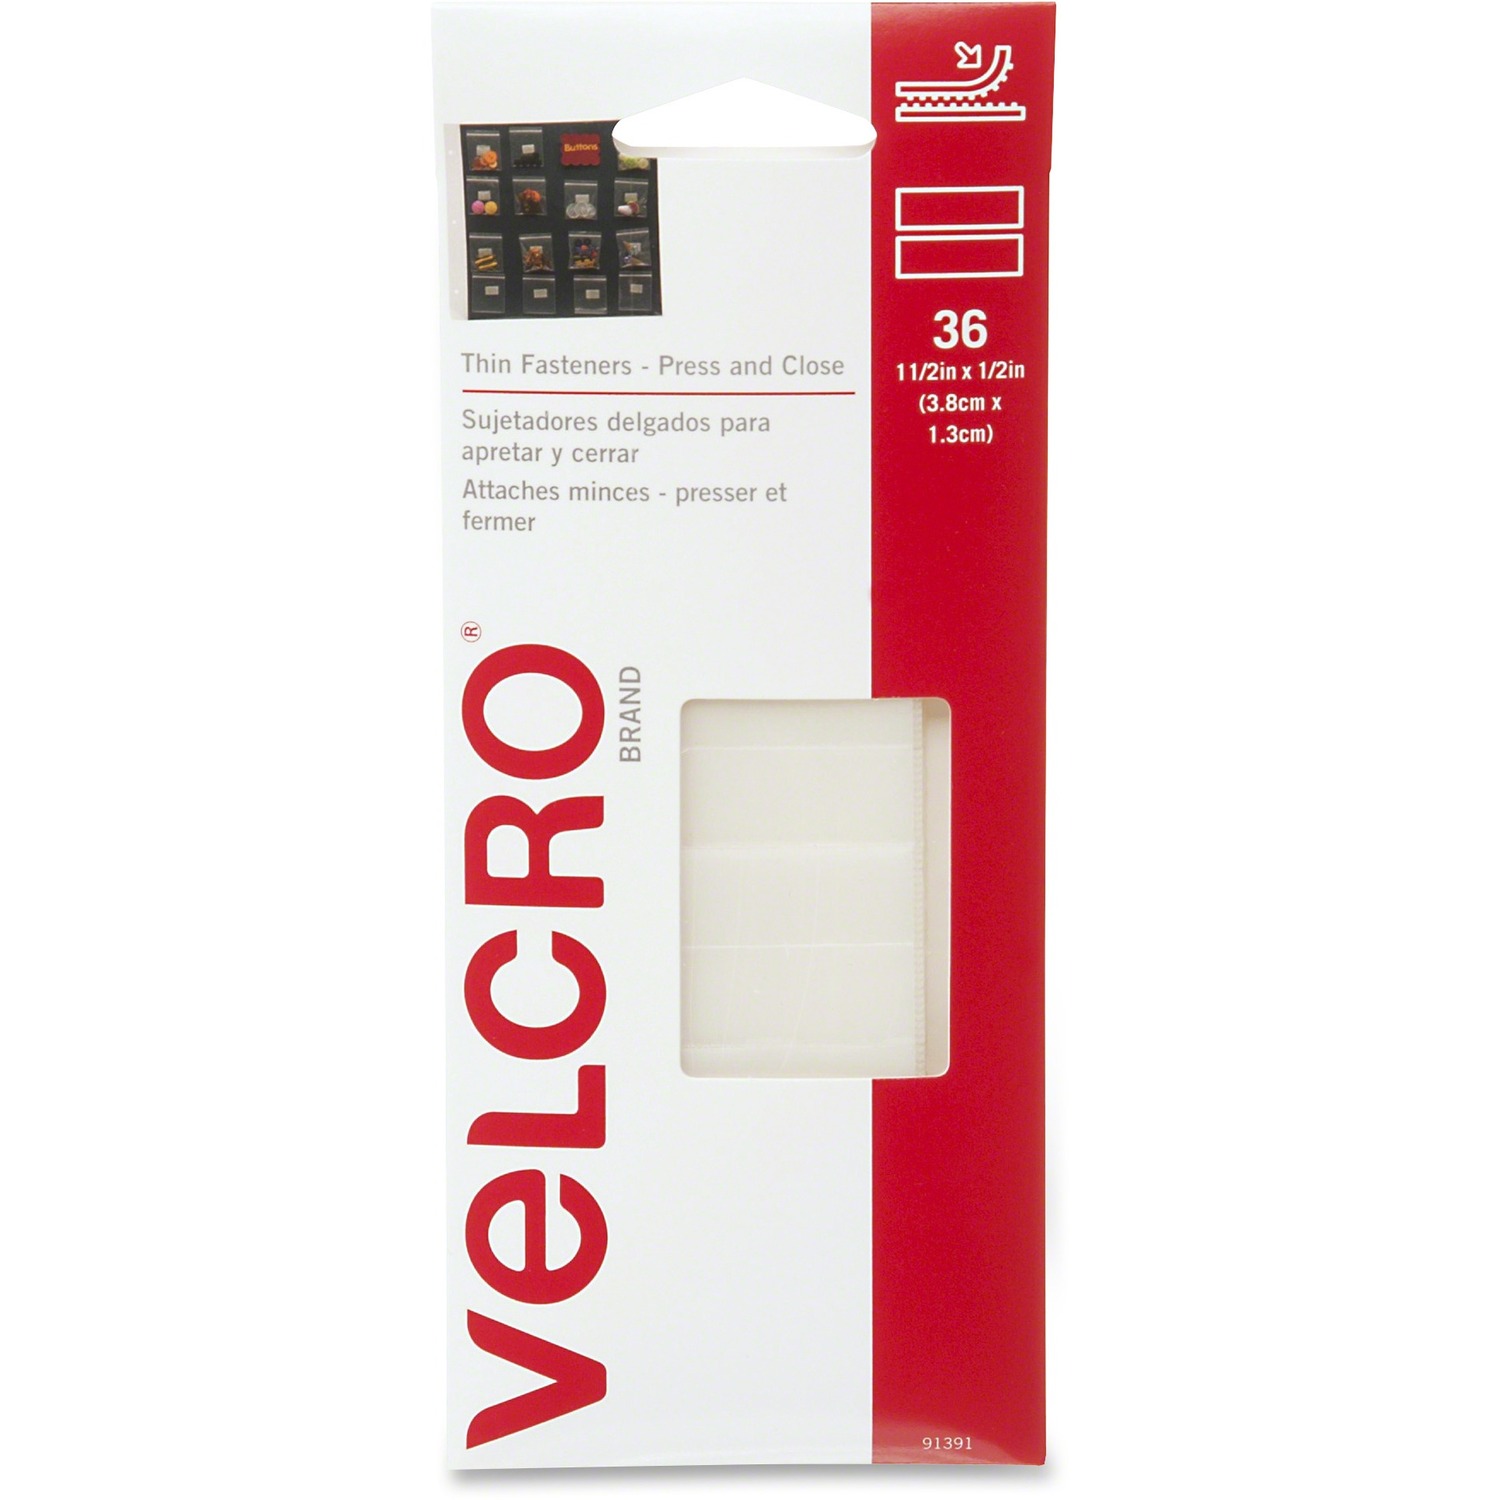 VELCRO® Brand Thin Fasteners - Press and Close 1 1/2in x 1/2in strips. 36 ct - image 1 of 2